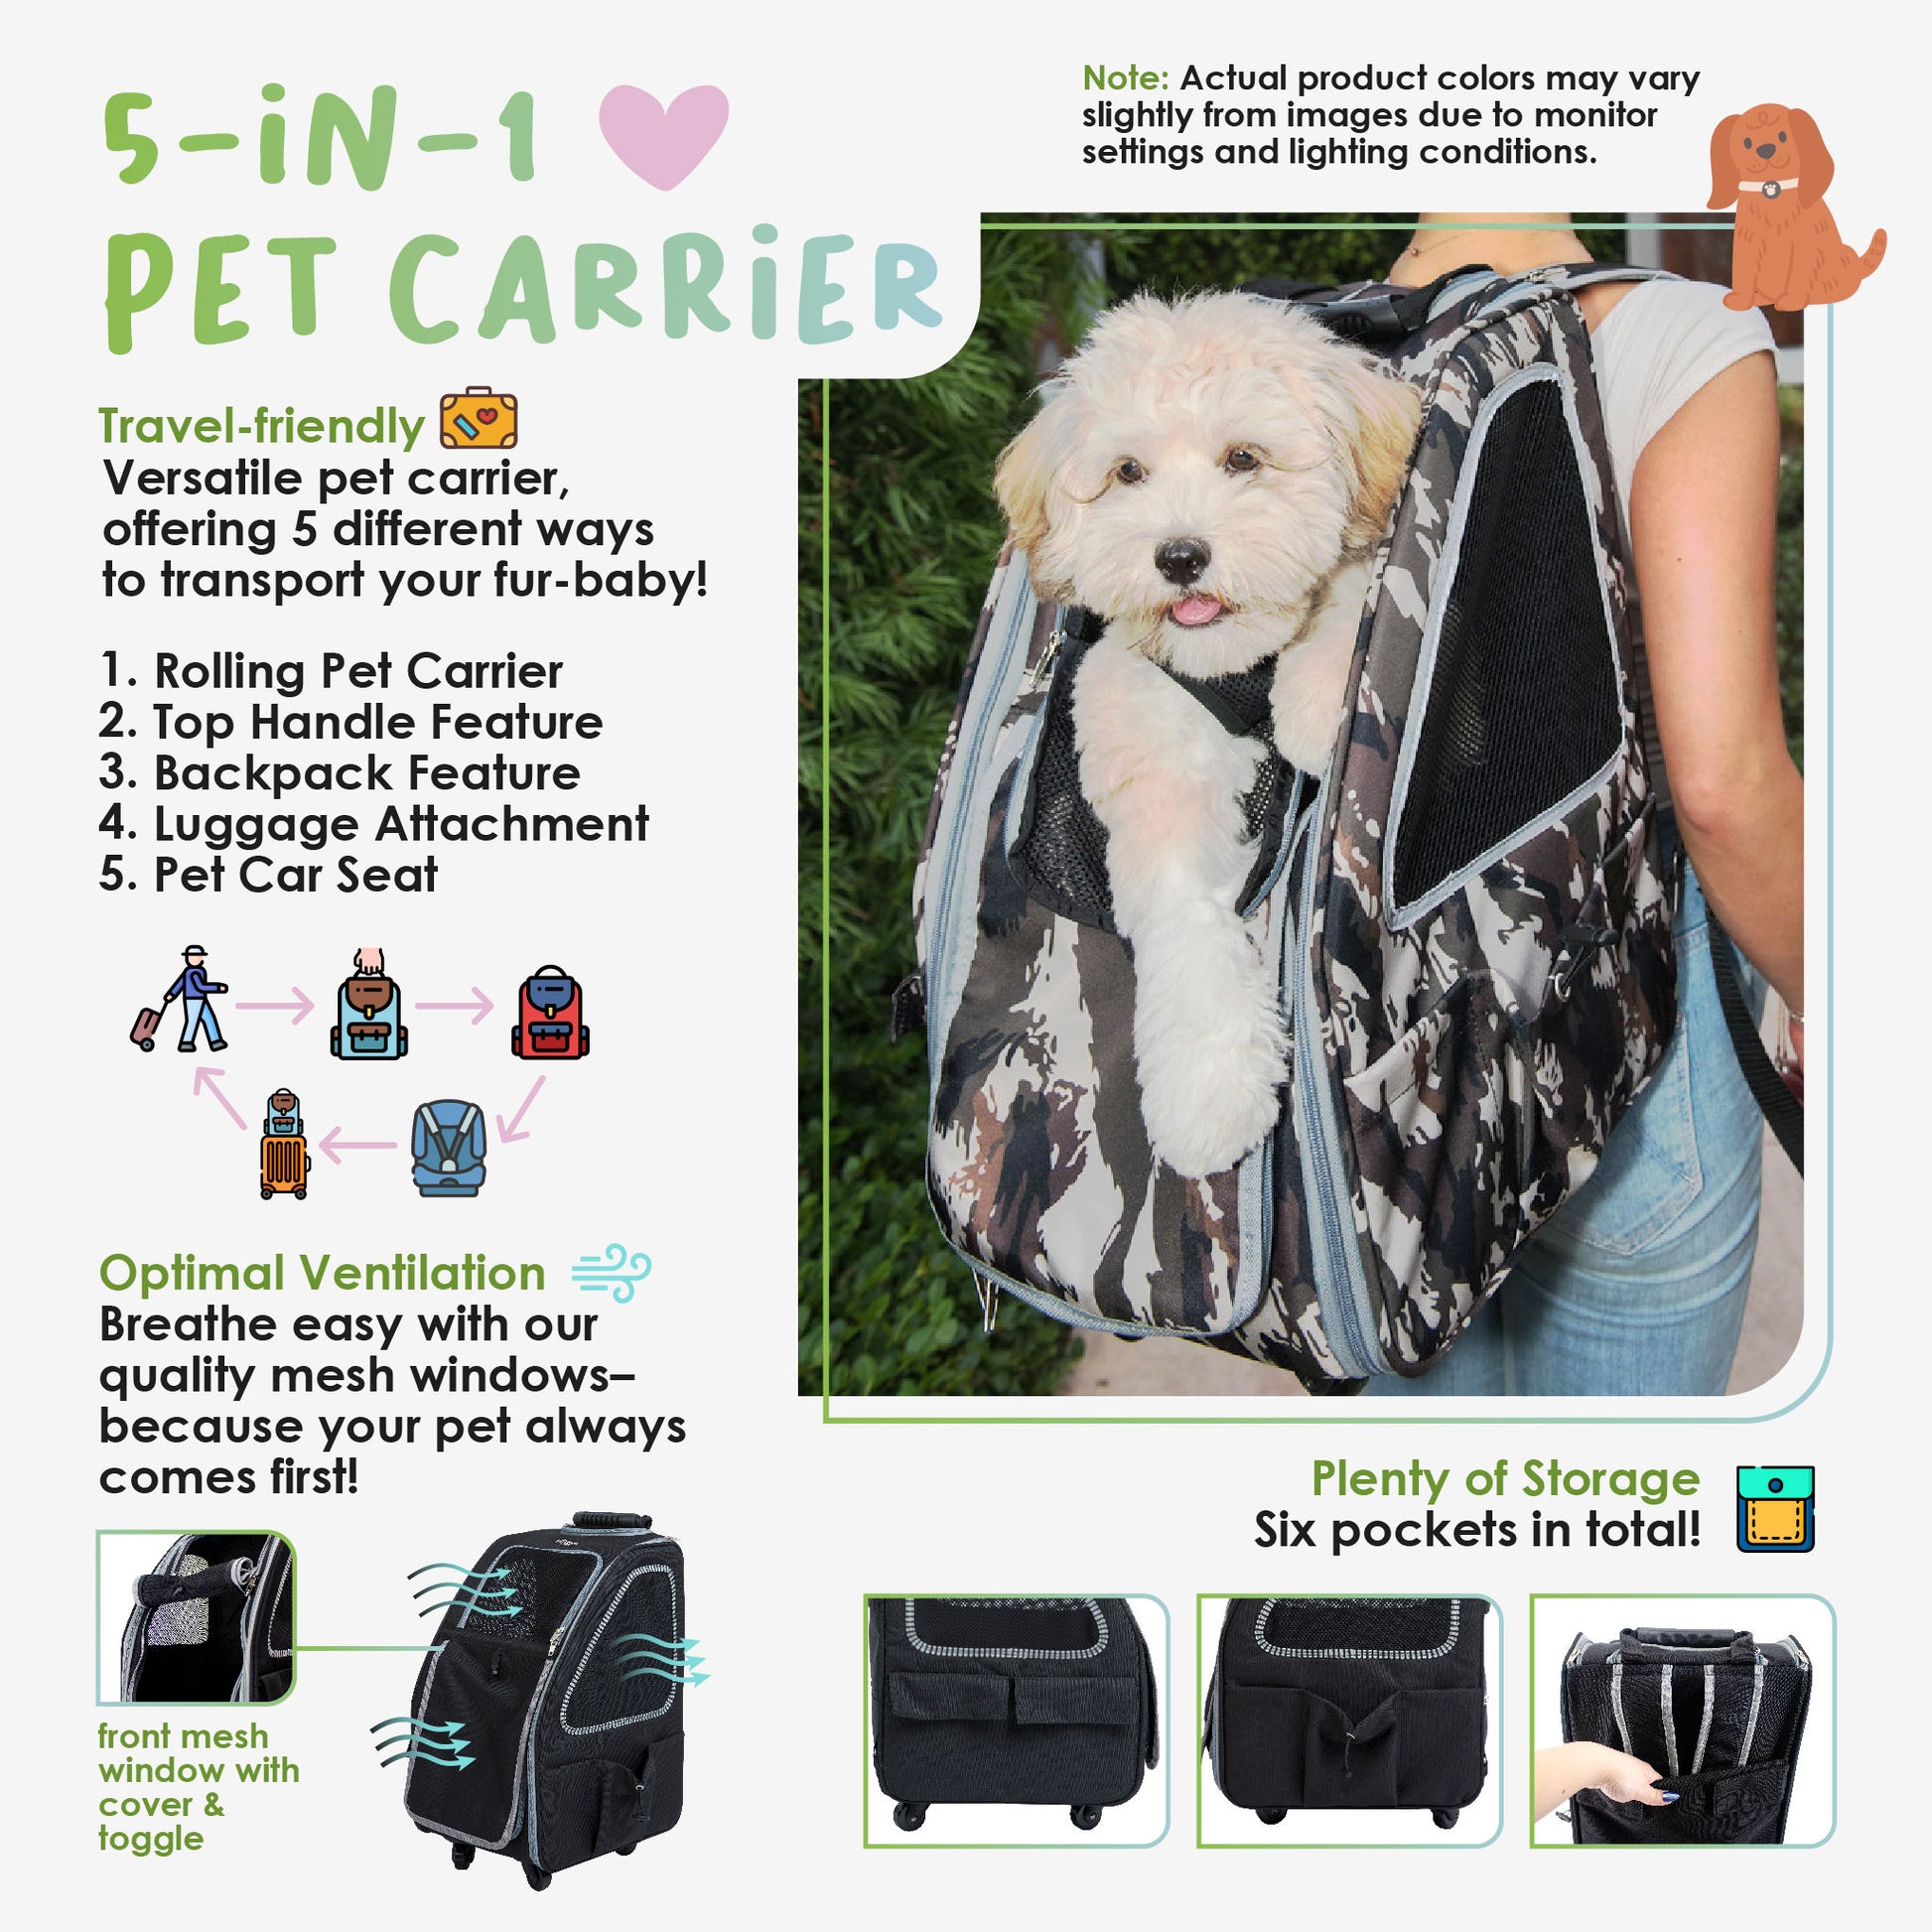 Top Opening Pet Carriers